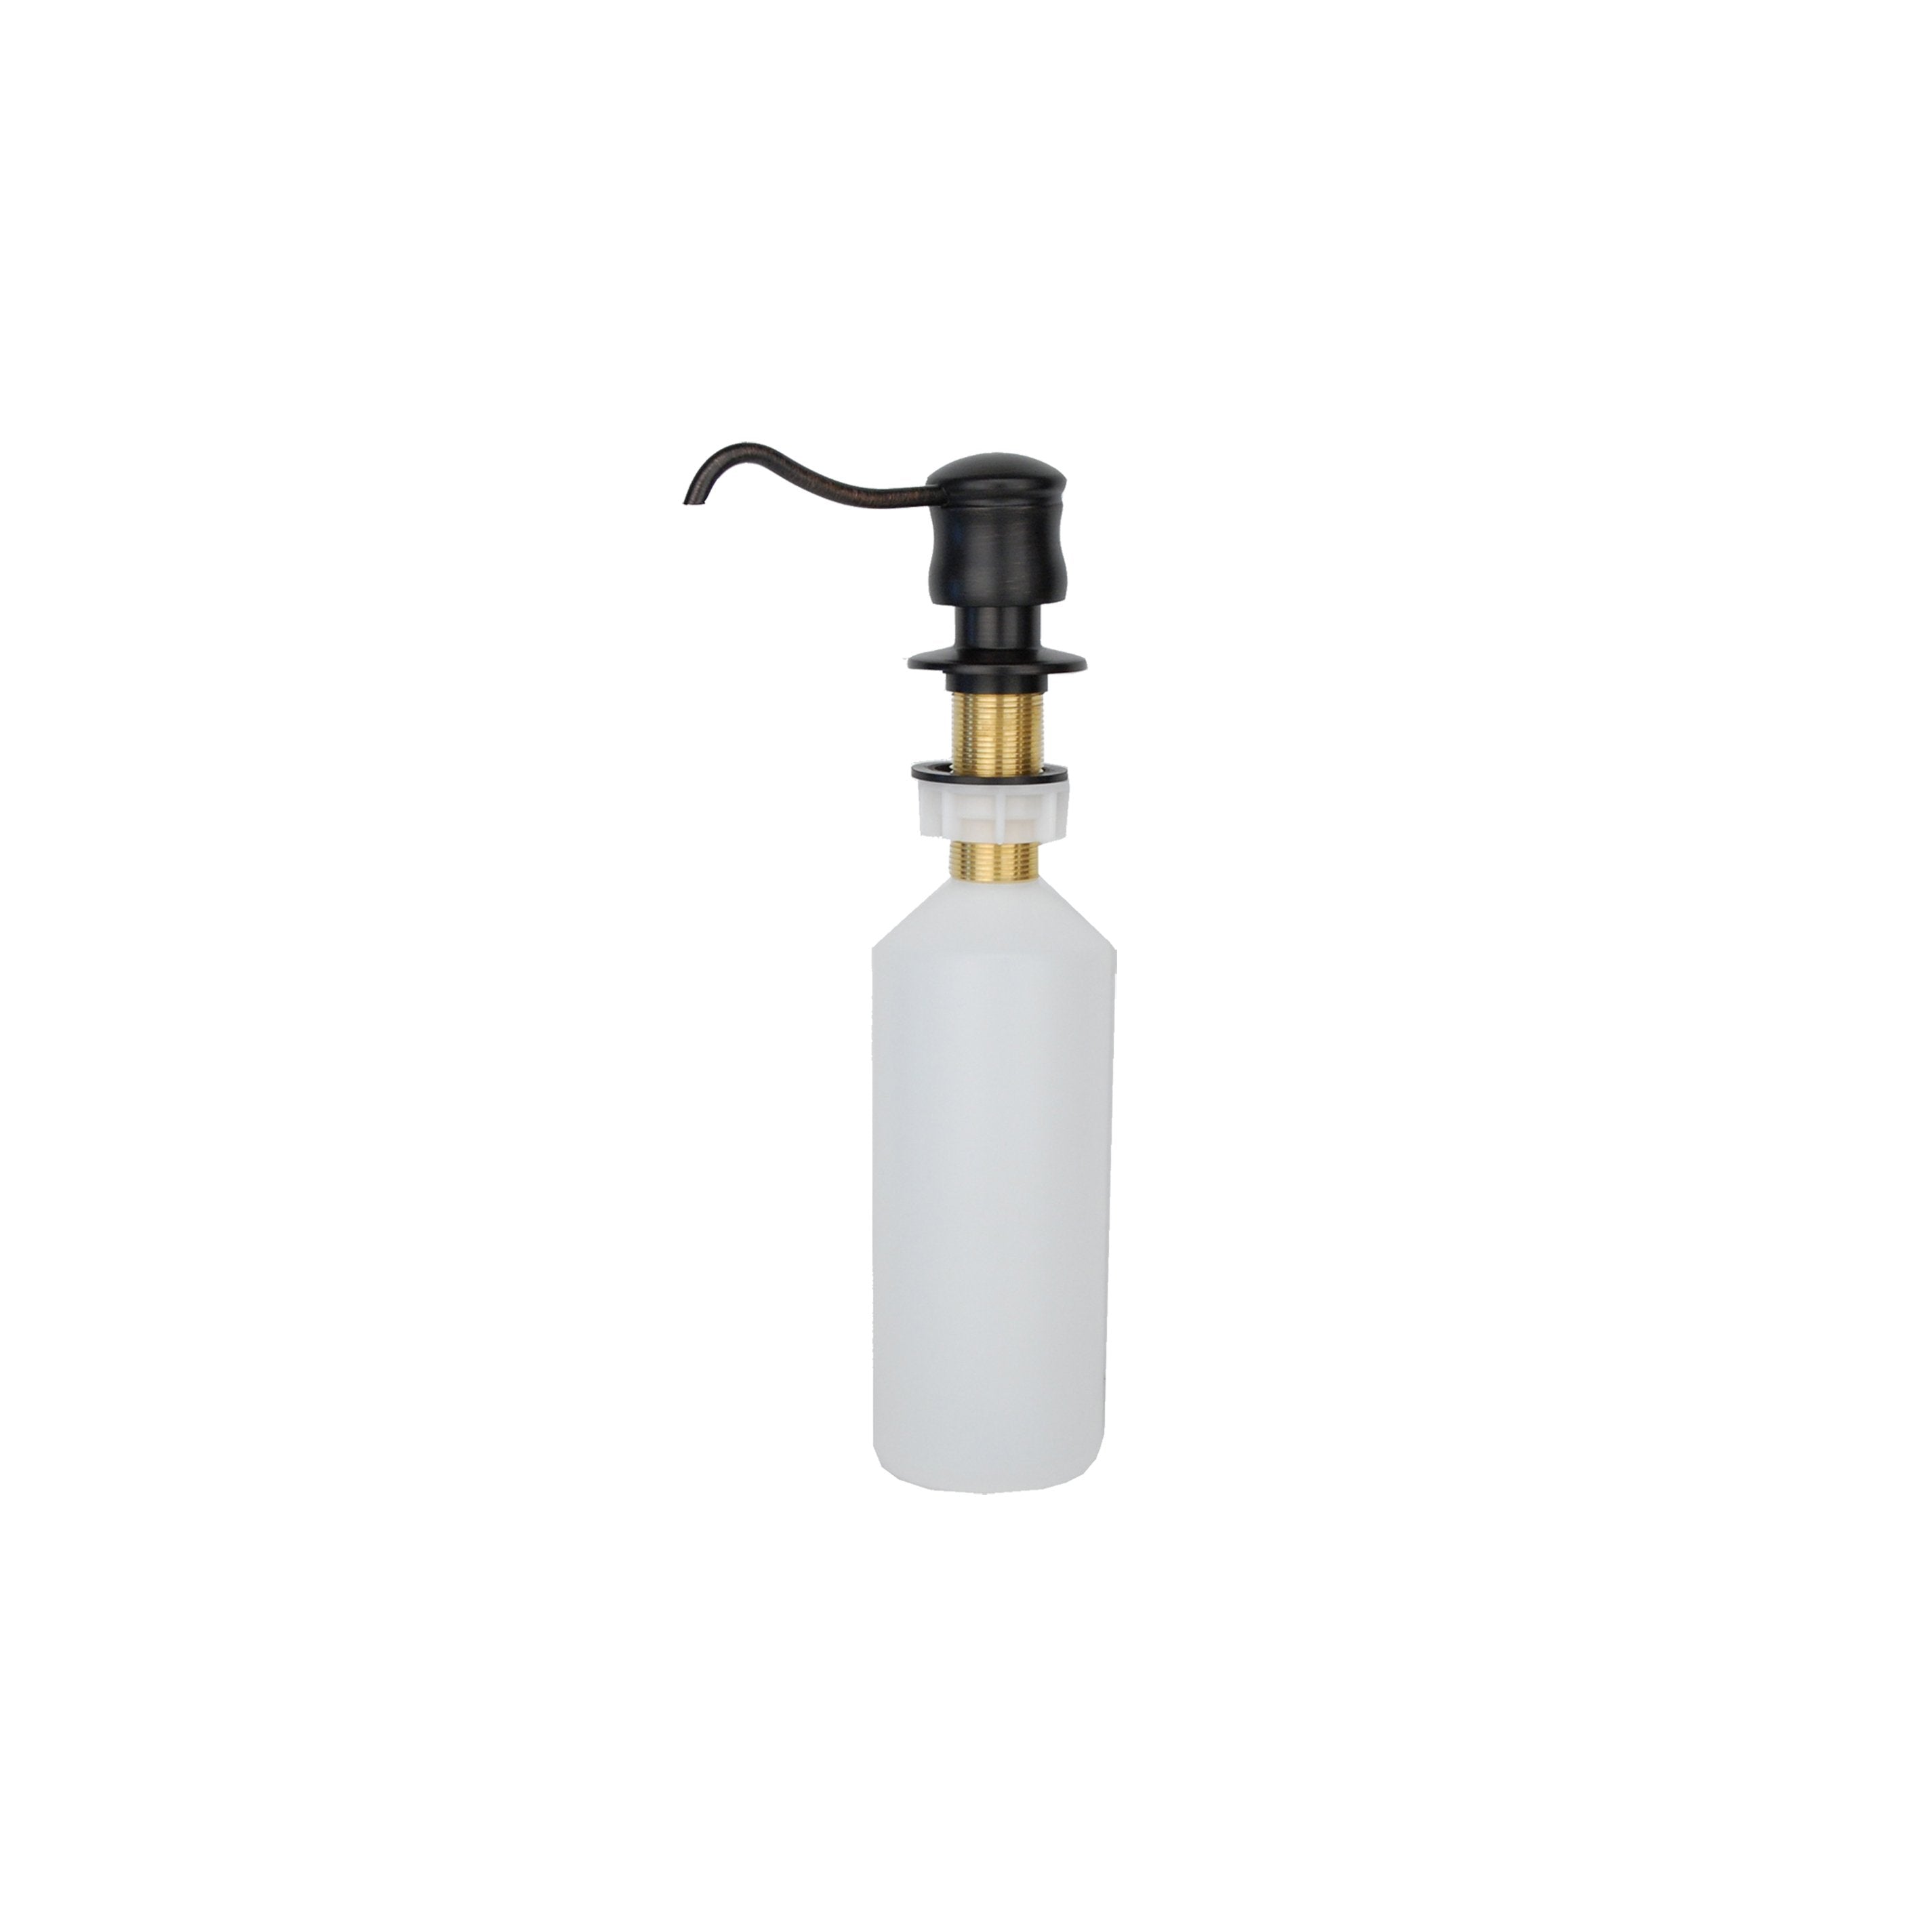 Premier Copper Products Solid Brass Soap & Lotion Dispenser in Oil Rubbed Bronze-DirectSinks